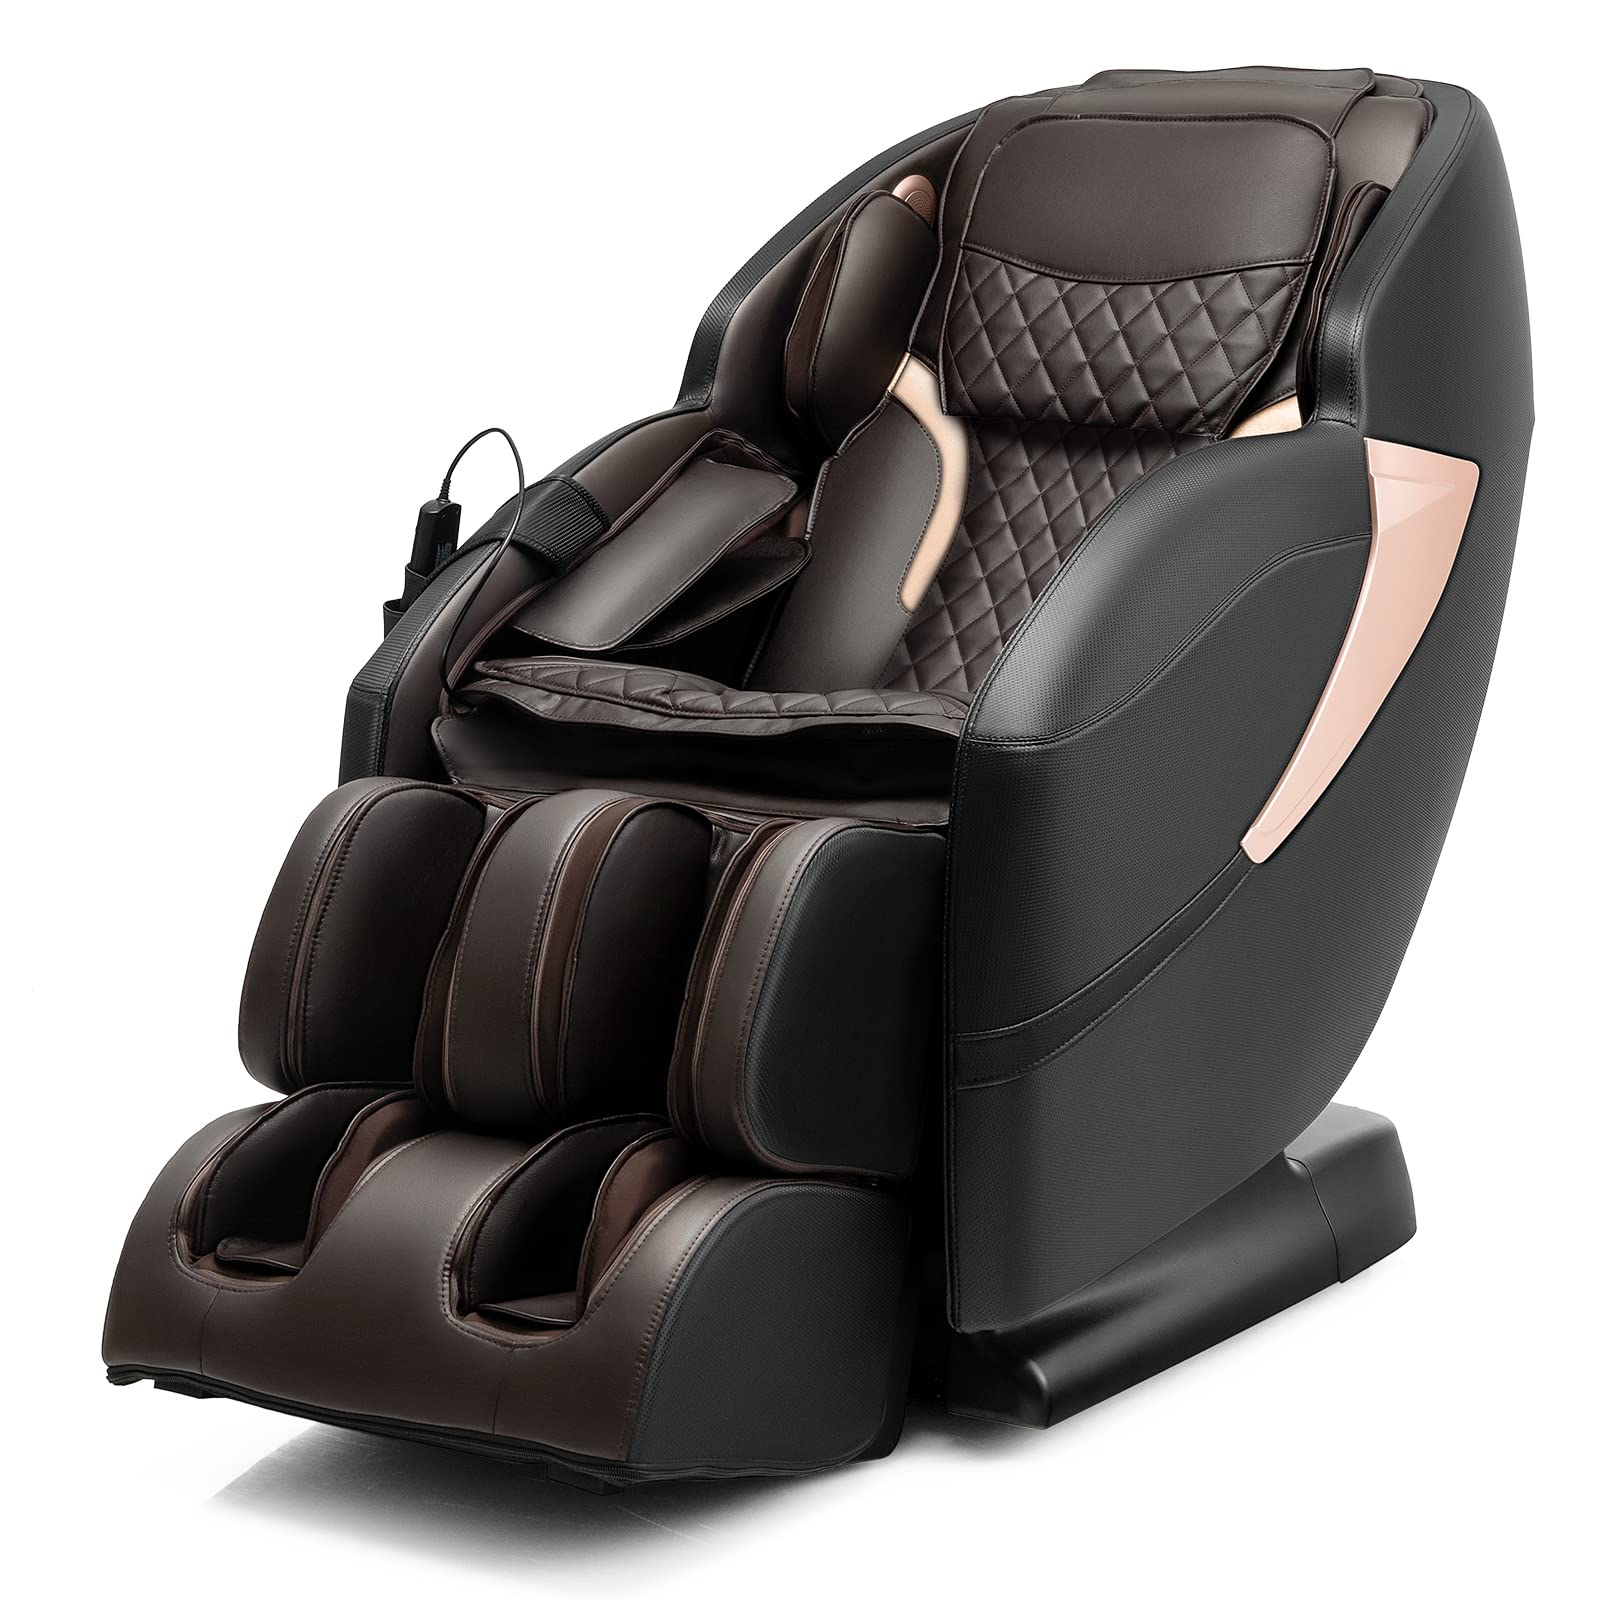 Giantex Massage Chair Full Body - Zero Gravity SL-Track Electric Massage Recliner with Voice Control, Blue-Tooth Speaker